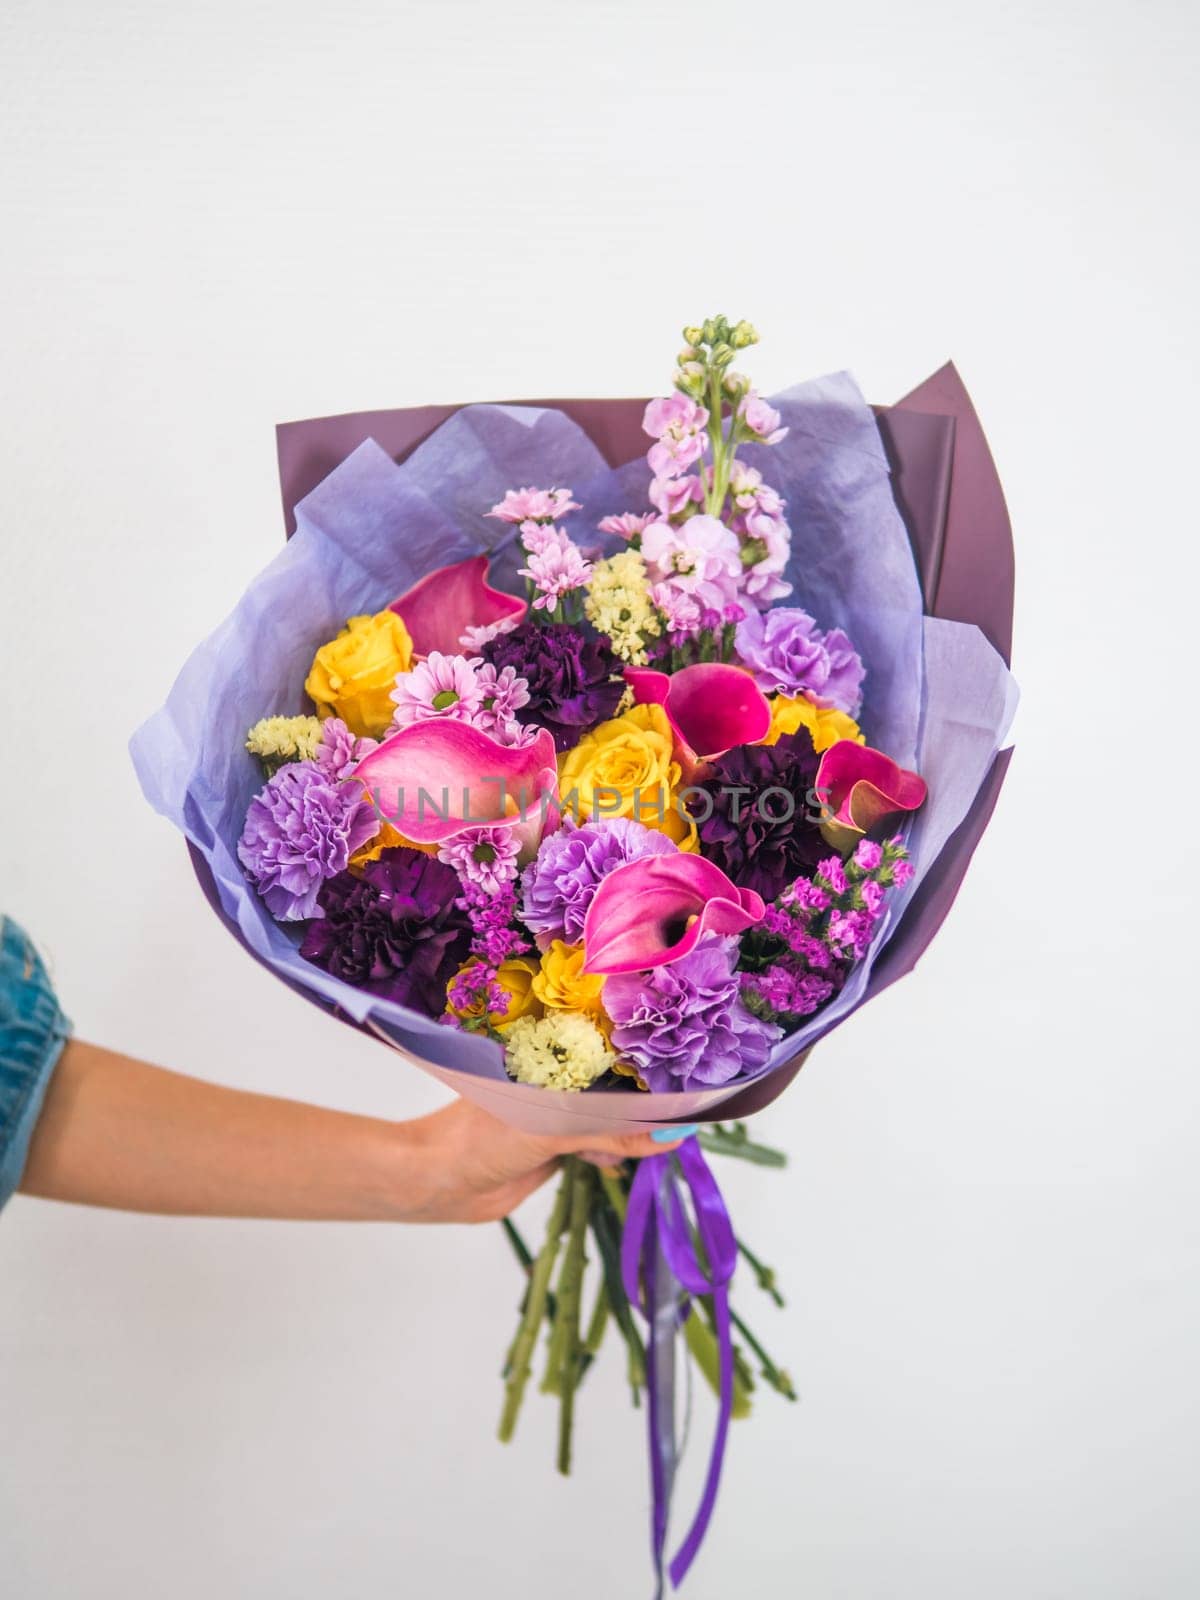 Beautiful bouquet with different flowers in woman hand. Lilac bouquet with arum lily or calla, roses, dianthus, chrysanthemum, limonium, matthiola. Shallow DOF, copy space. Vertical